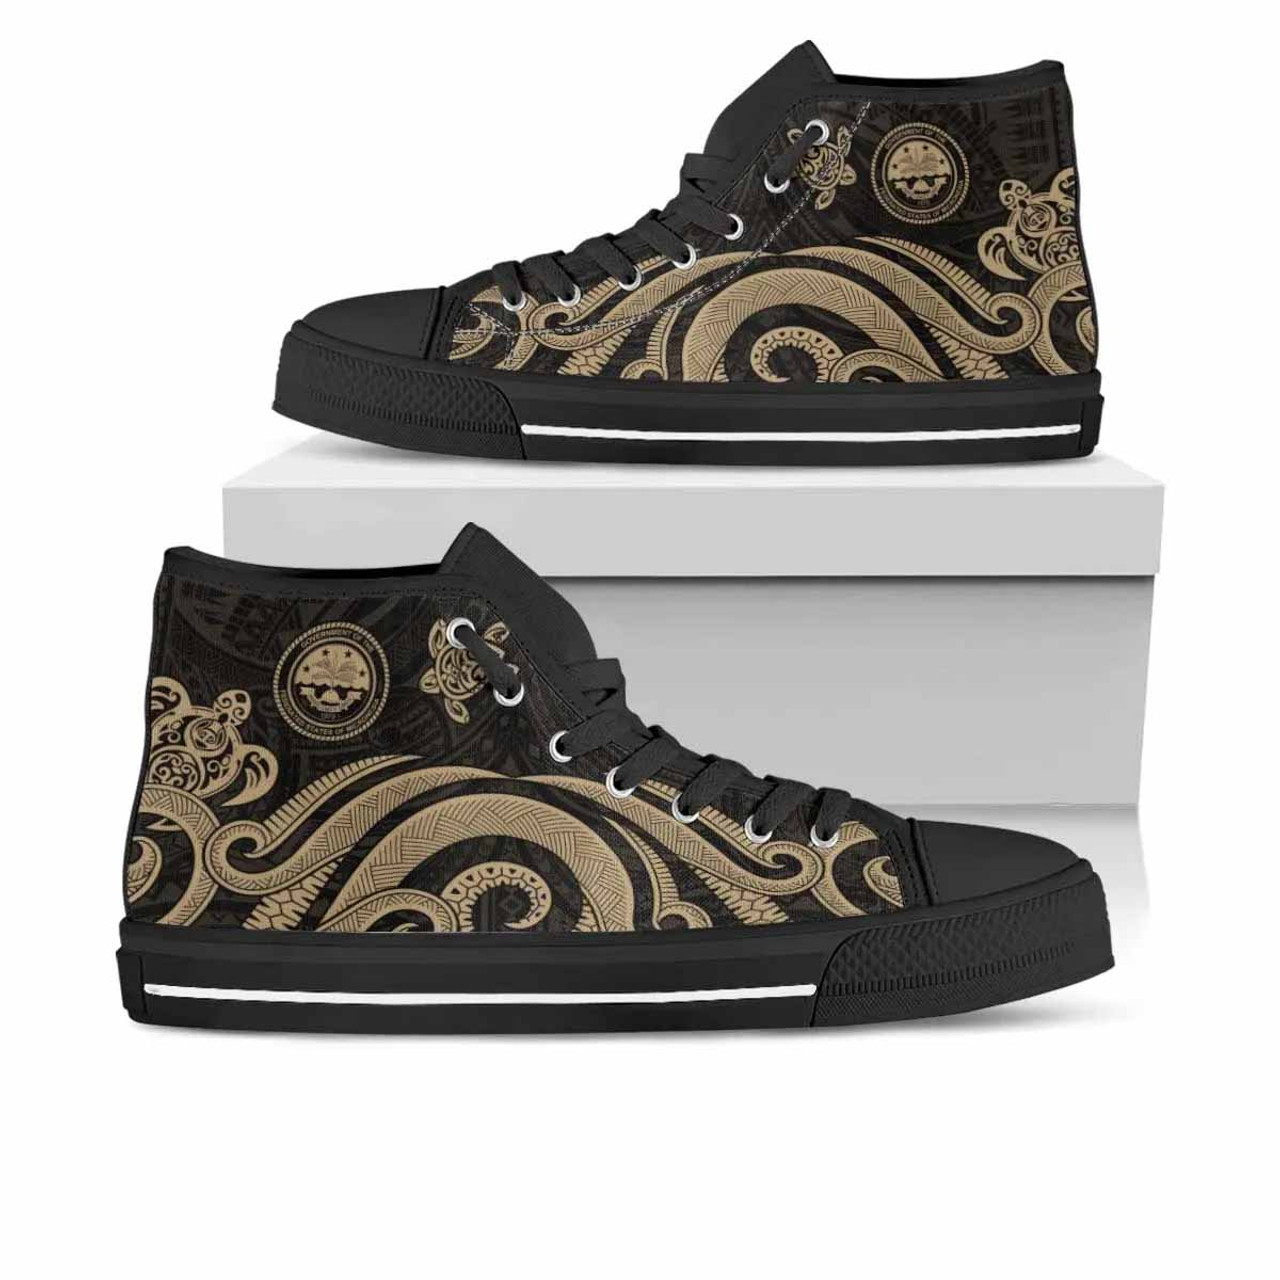 Federated States of Micronesia High Top Shoes - Gold Tentacle Turtle 1